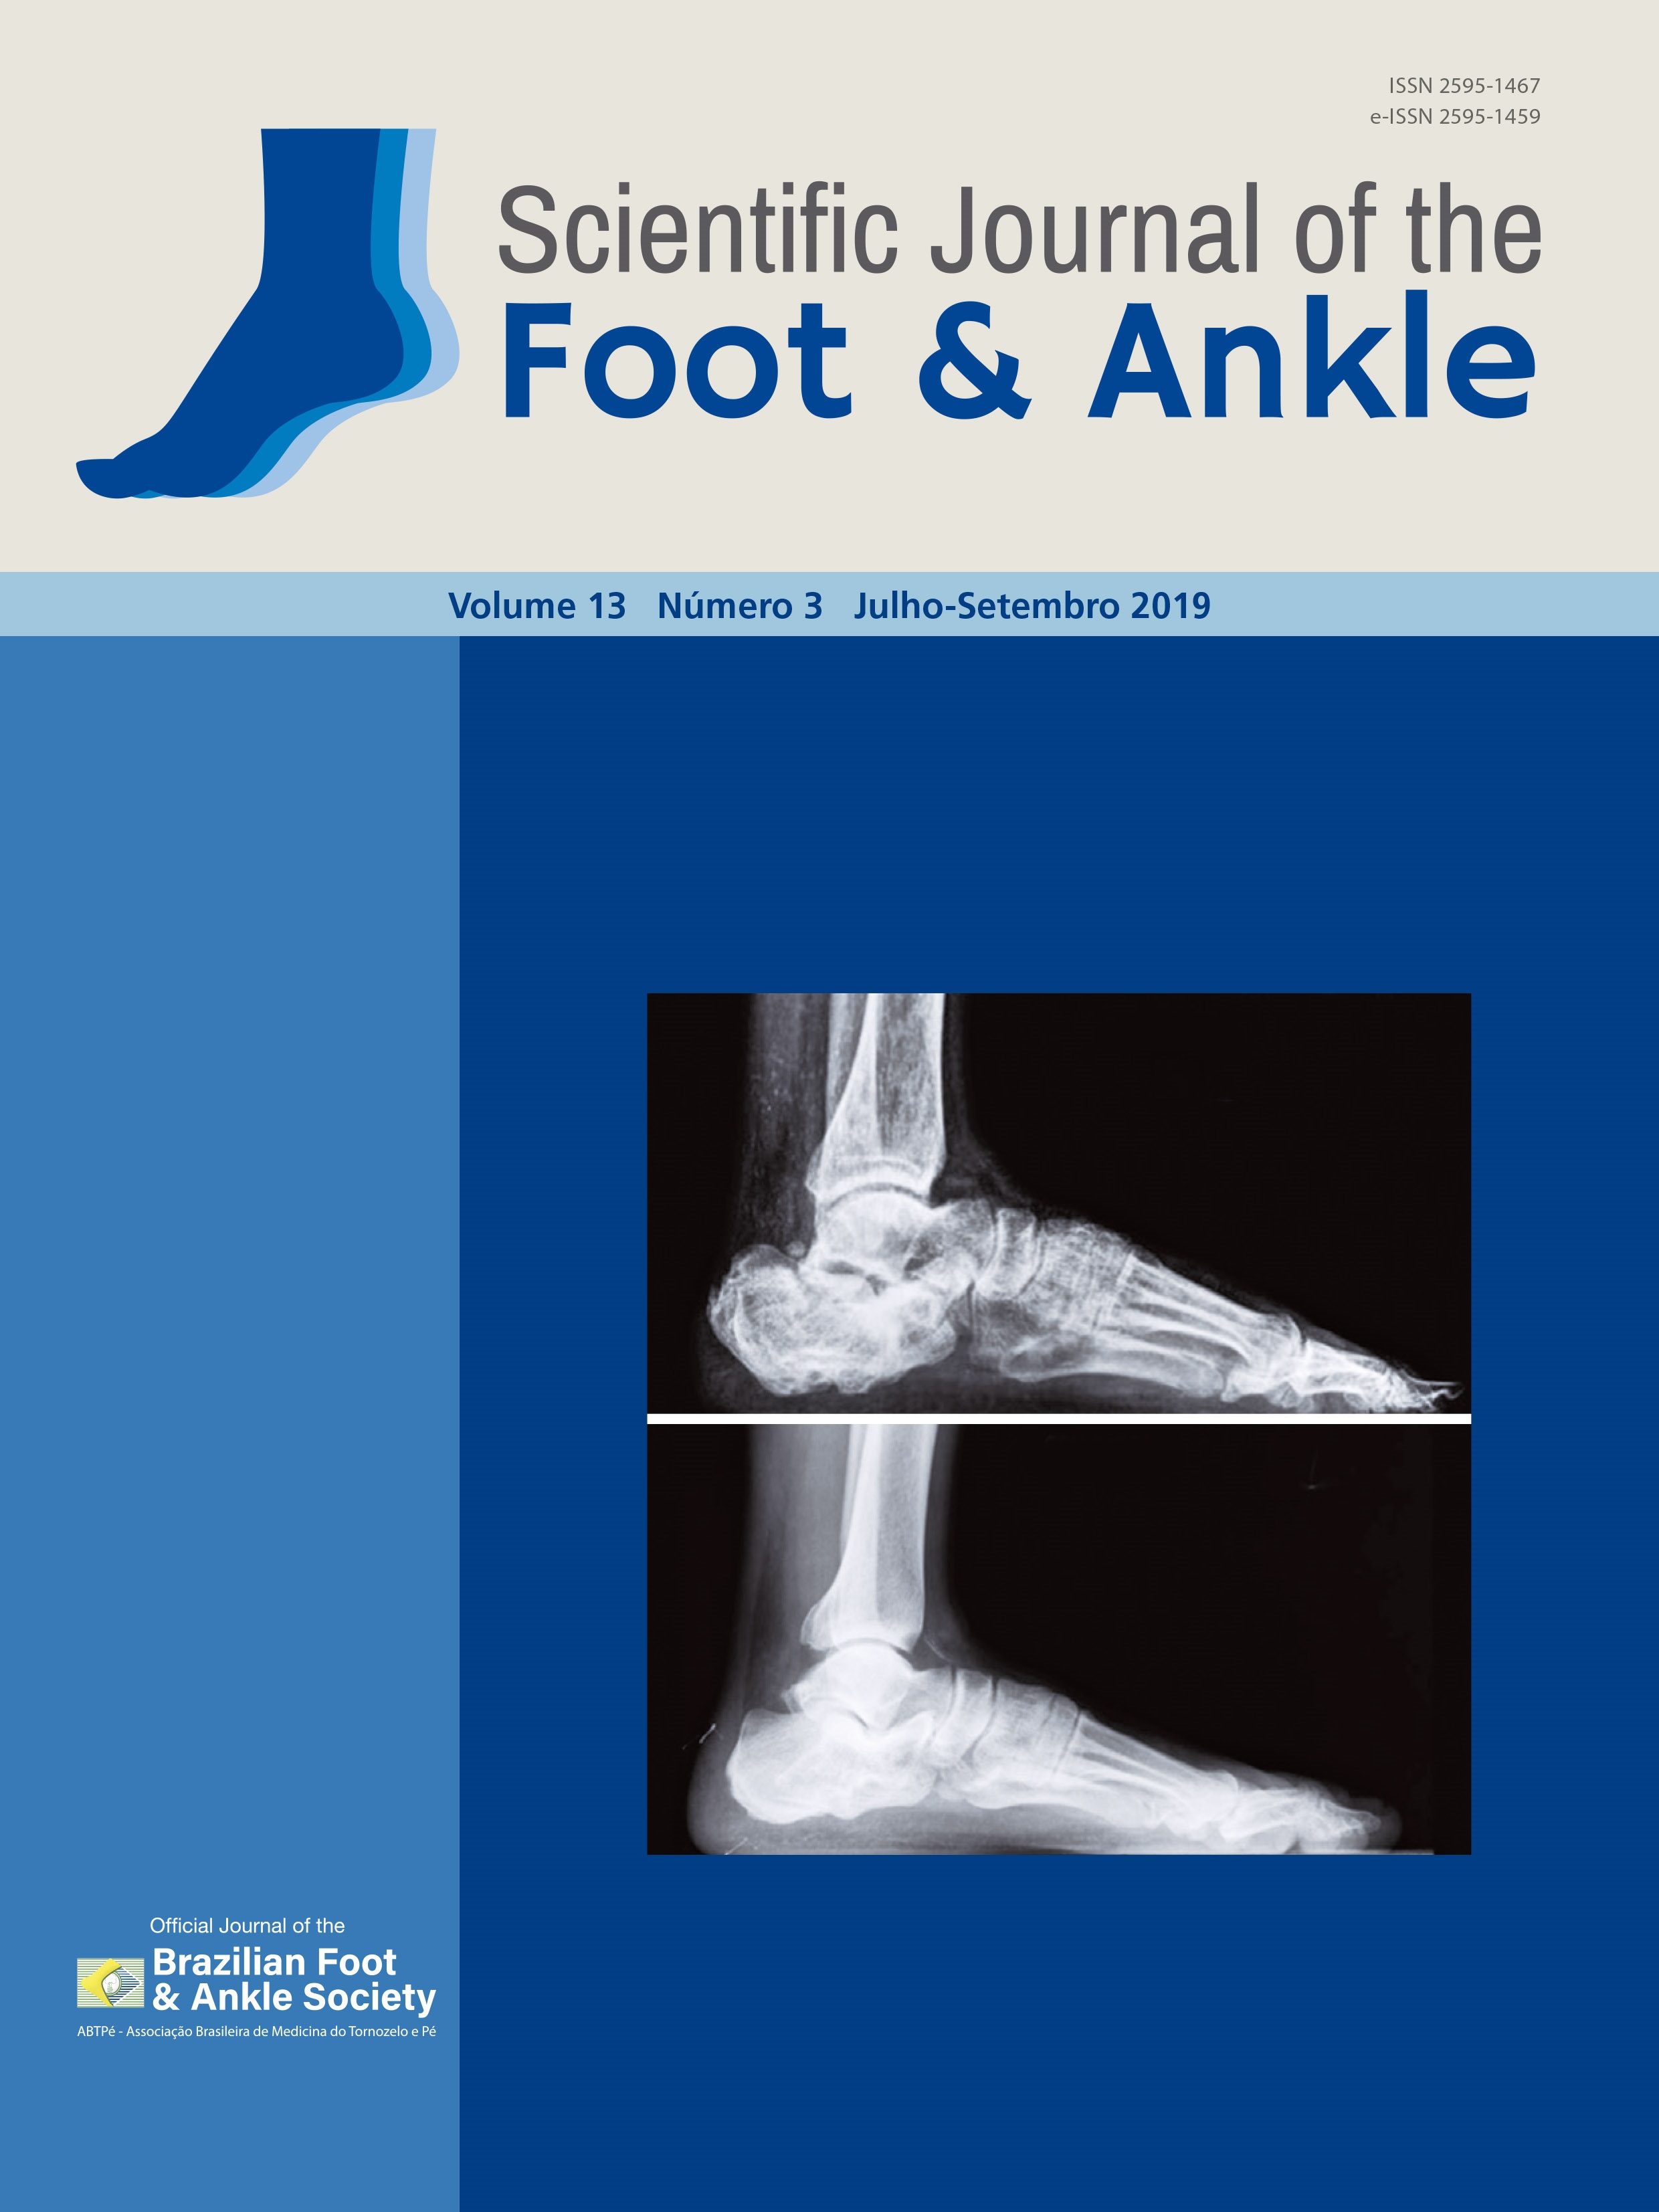 					Visualizar v. 13 n. 3 (2019): Scientific Journal of the Foot and Ankle
				